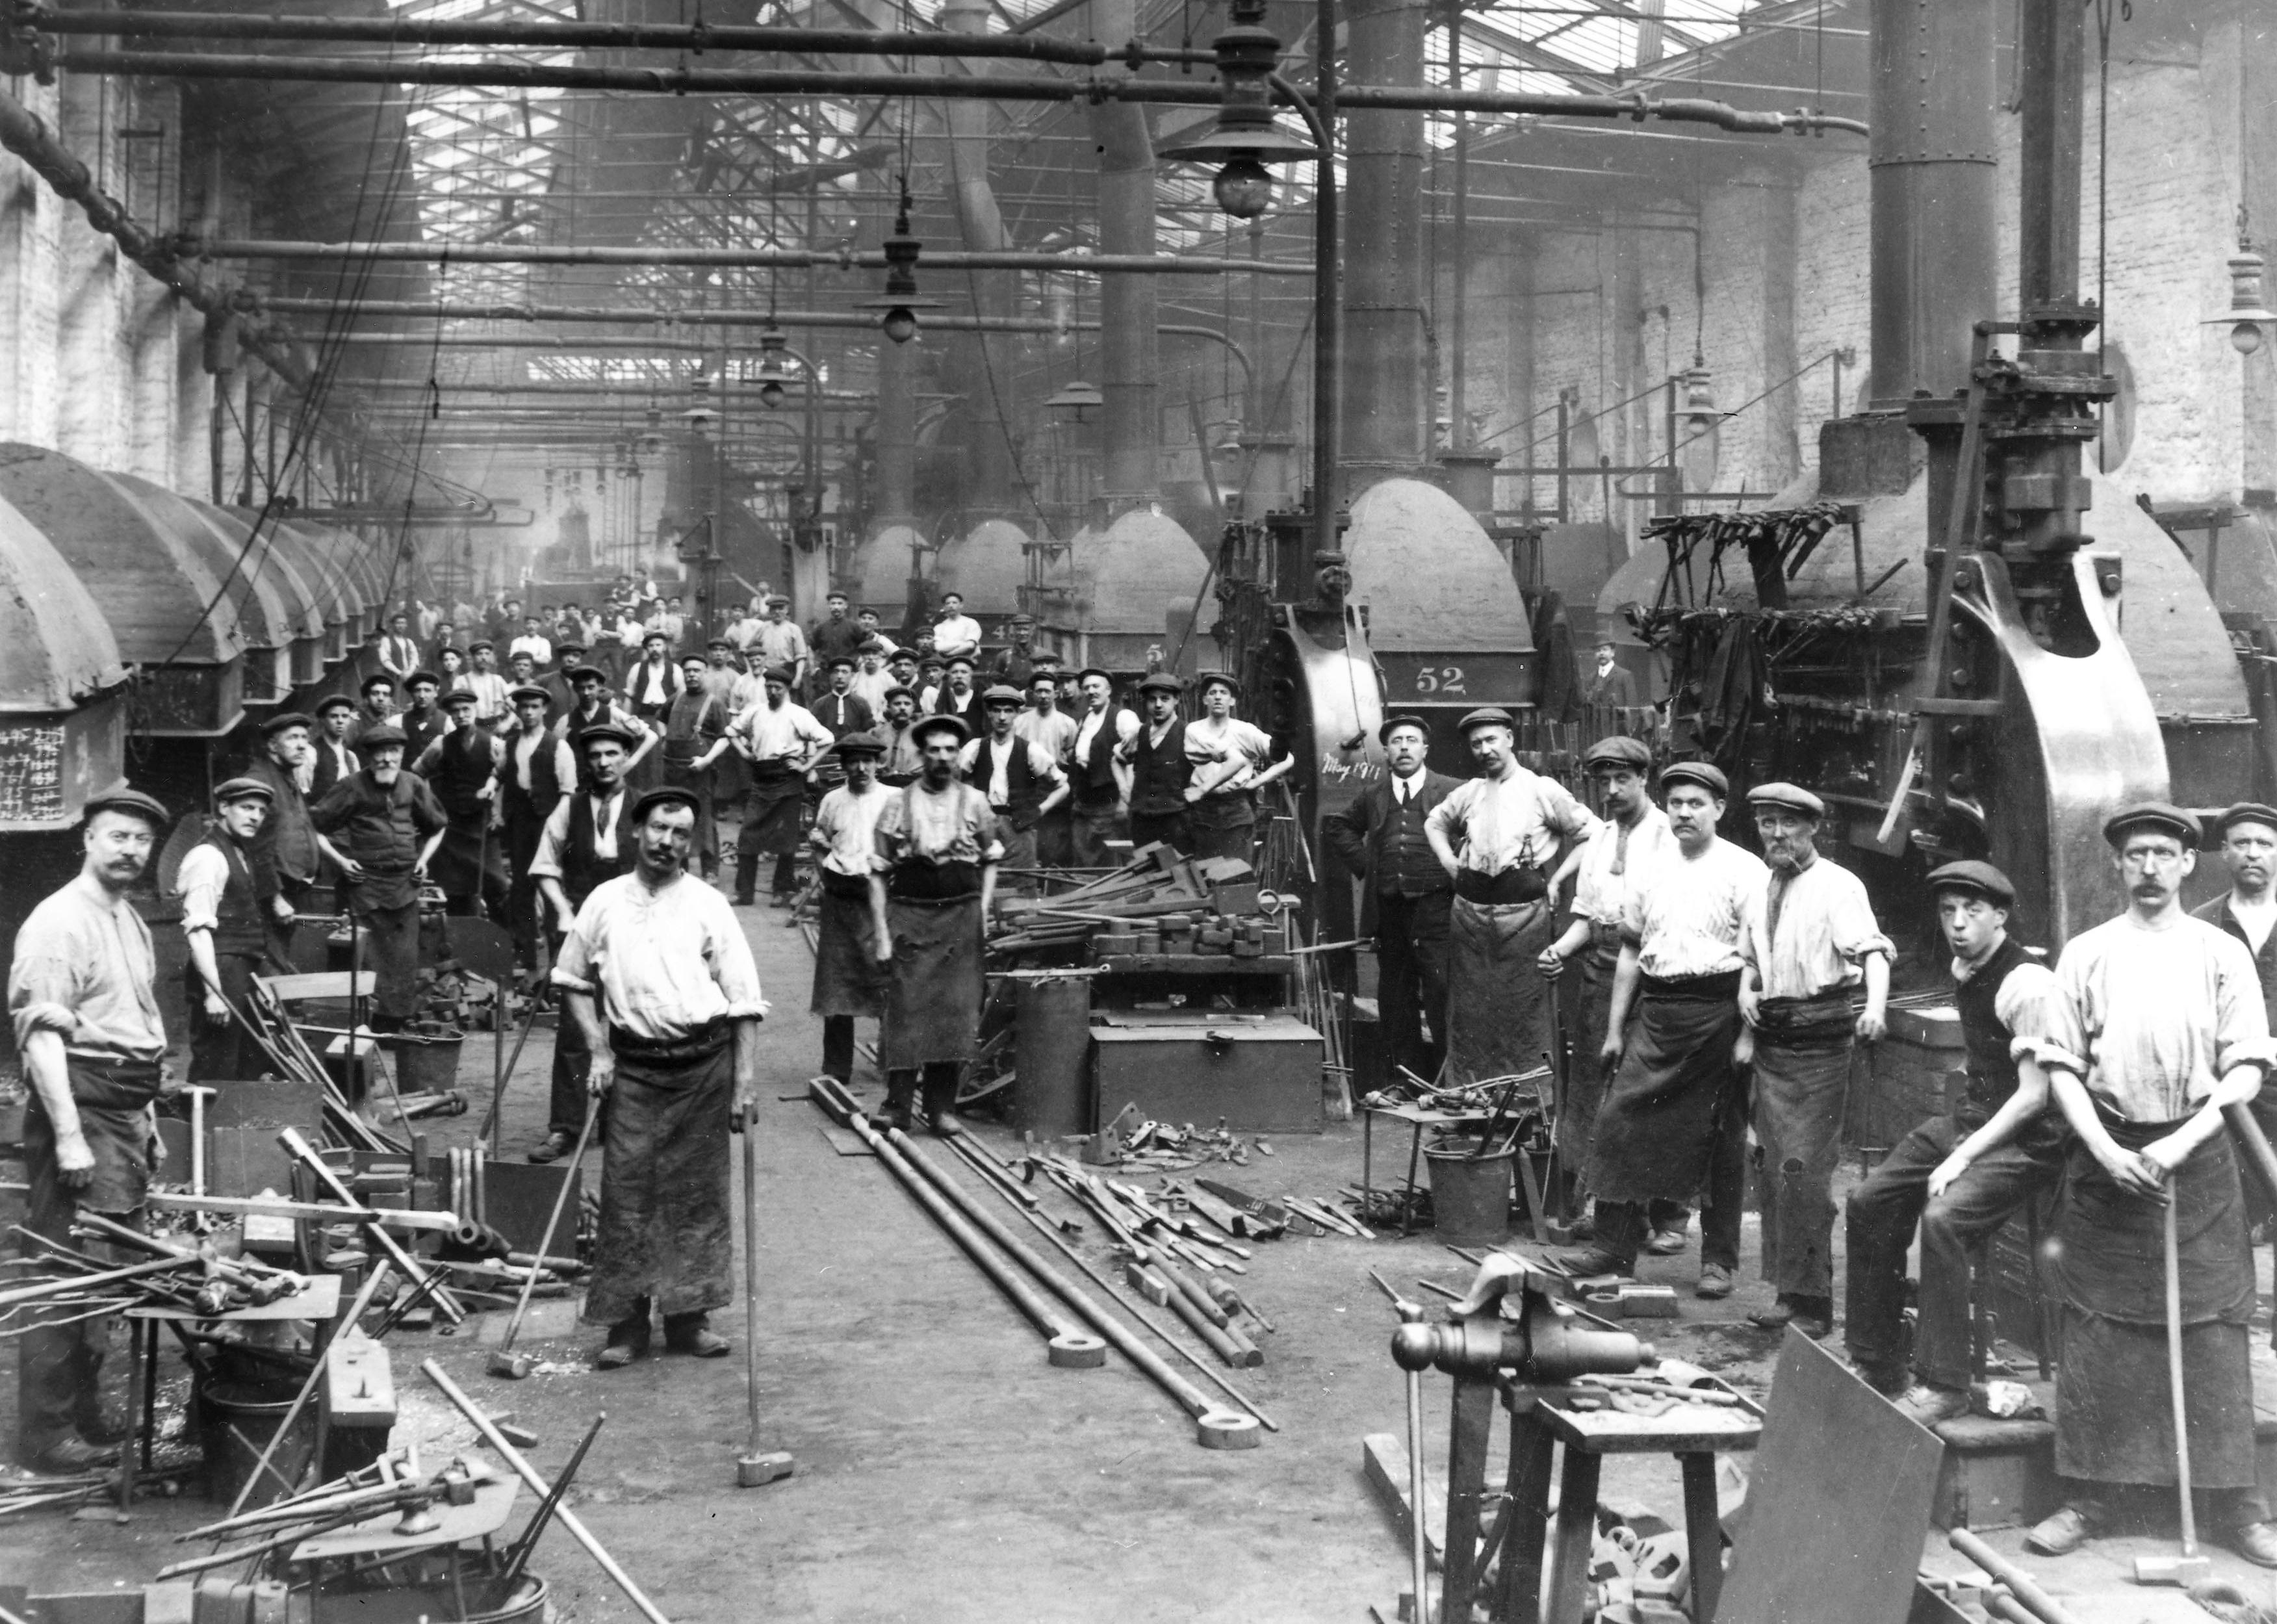 Railway workers in the blacksmiths